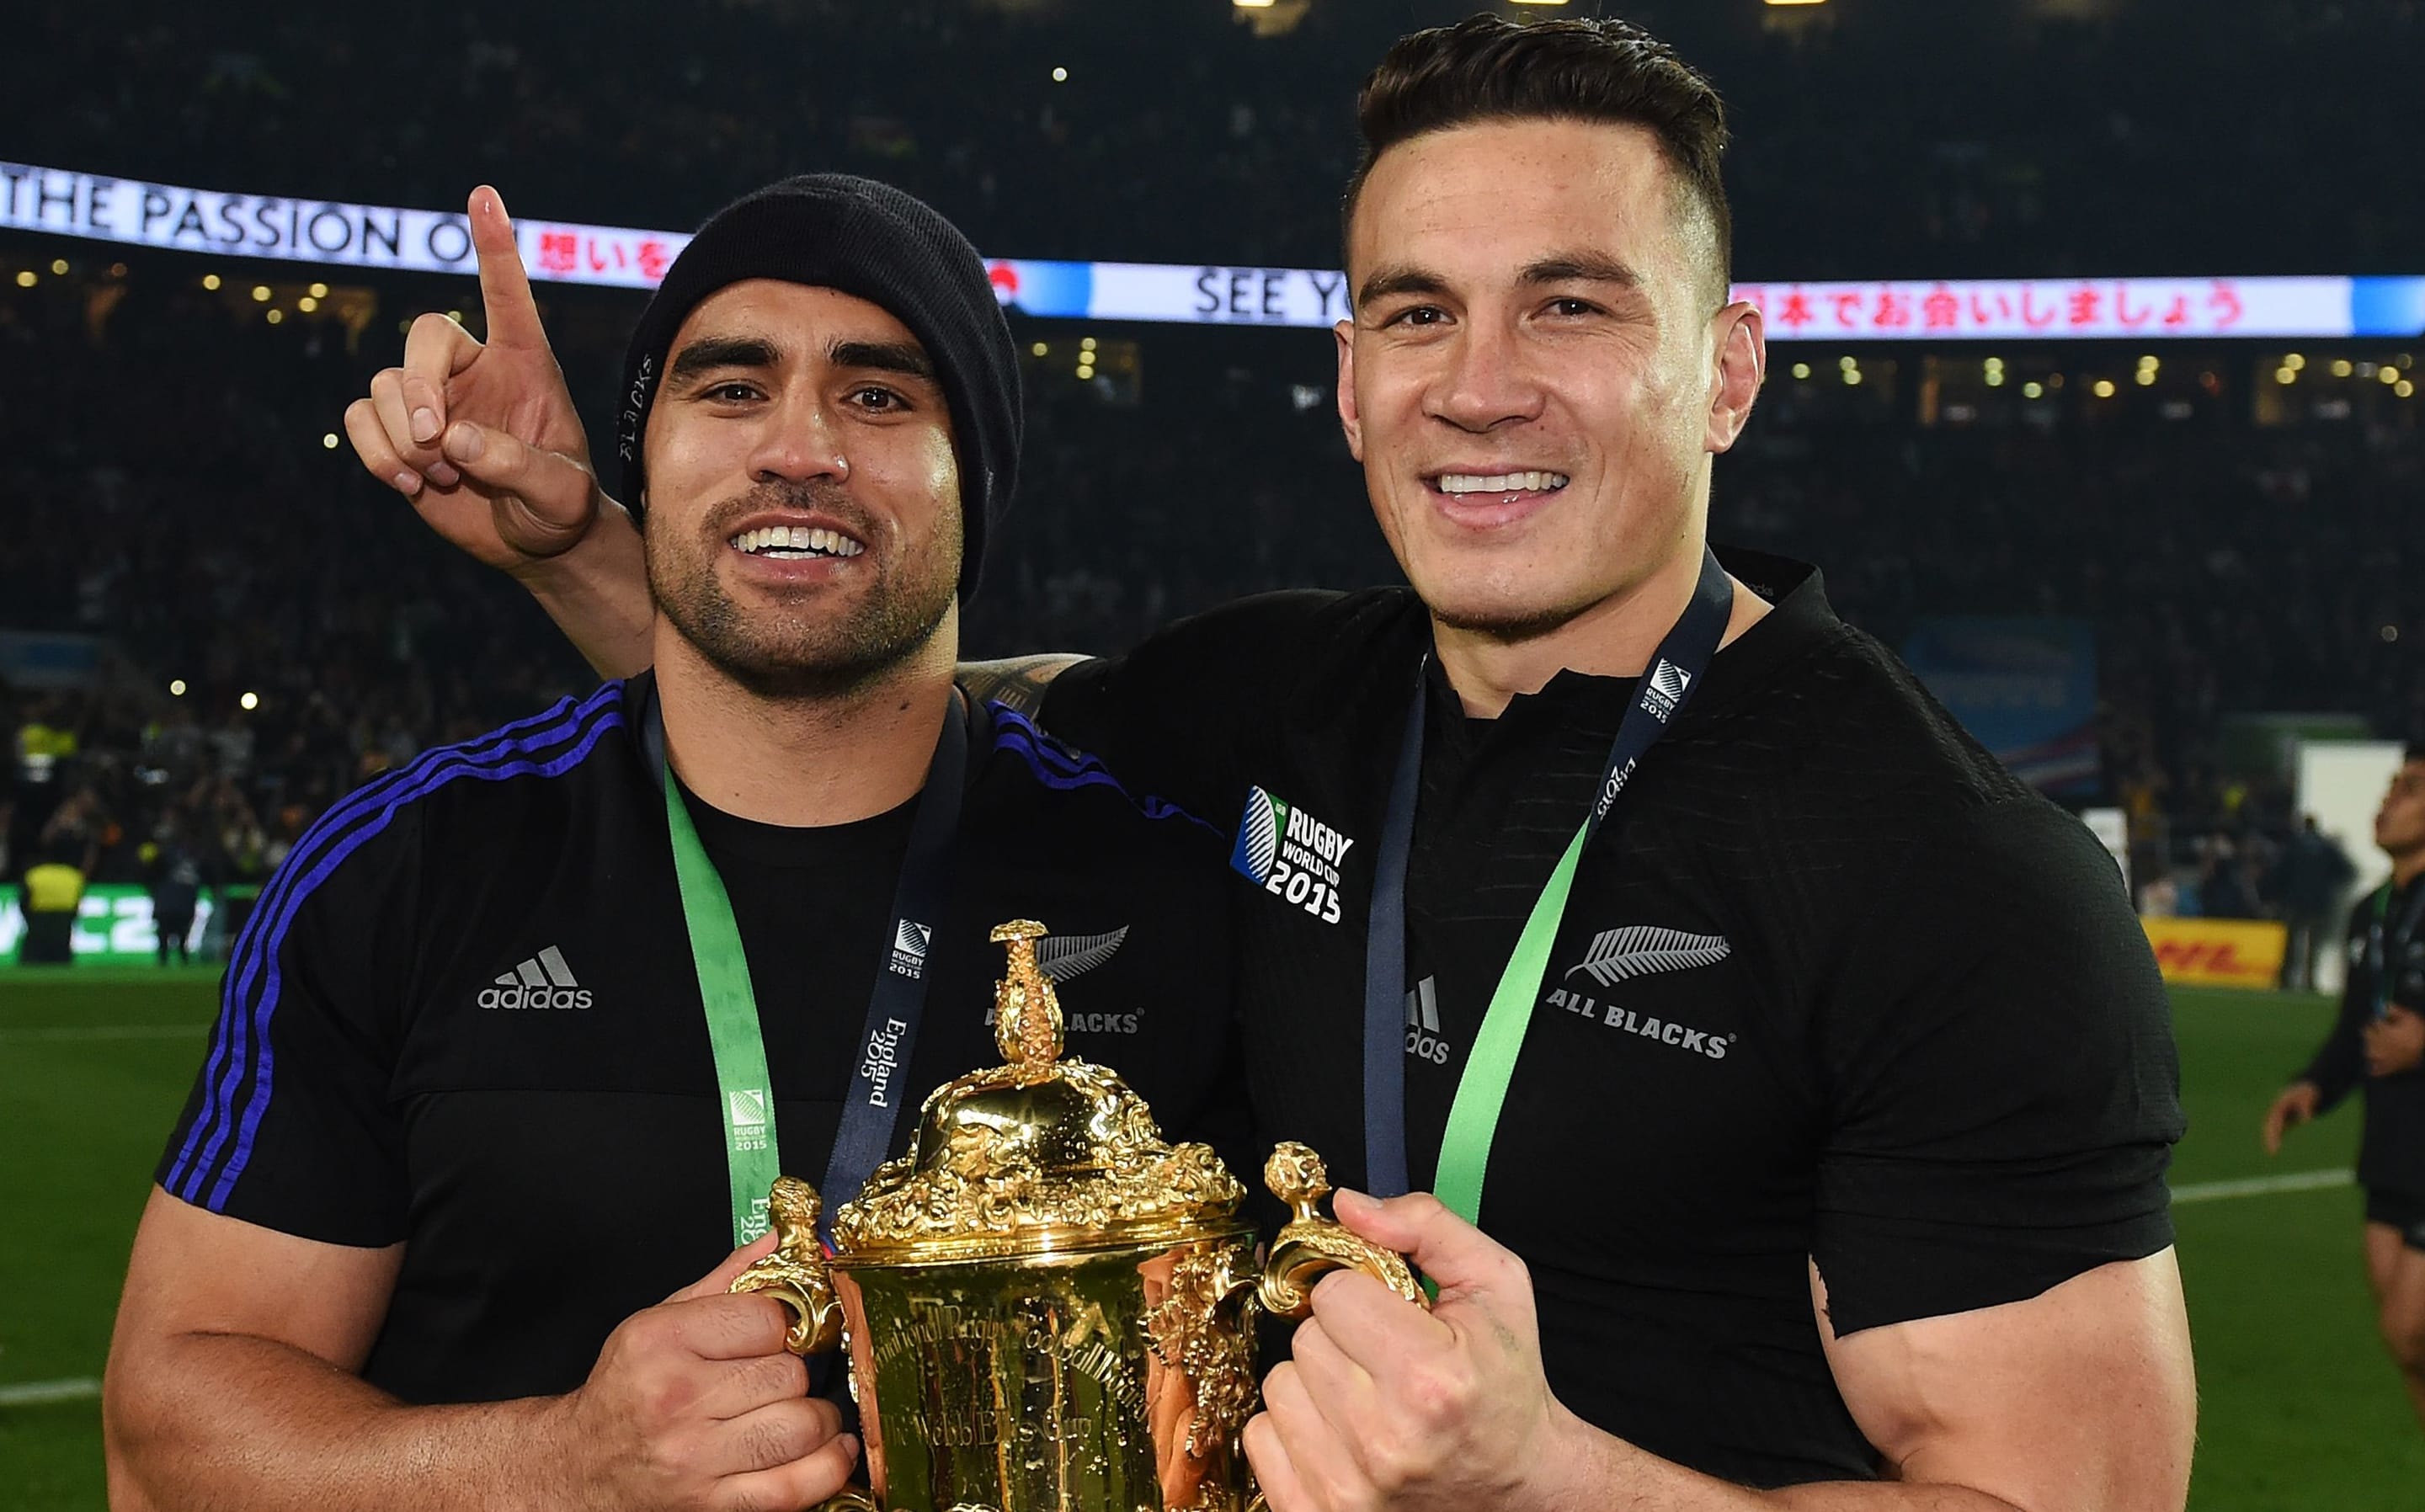 Liam Messam and Sonny Bill Williams celebrate winning the World Cup 2015.